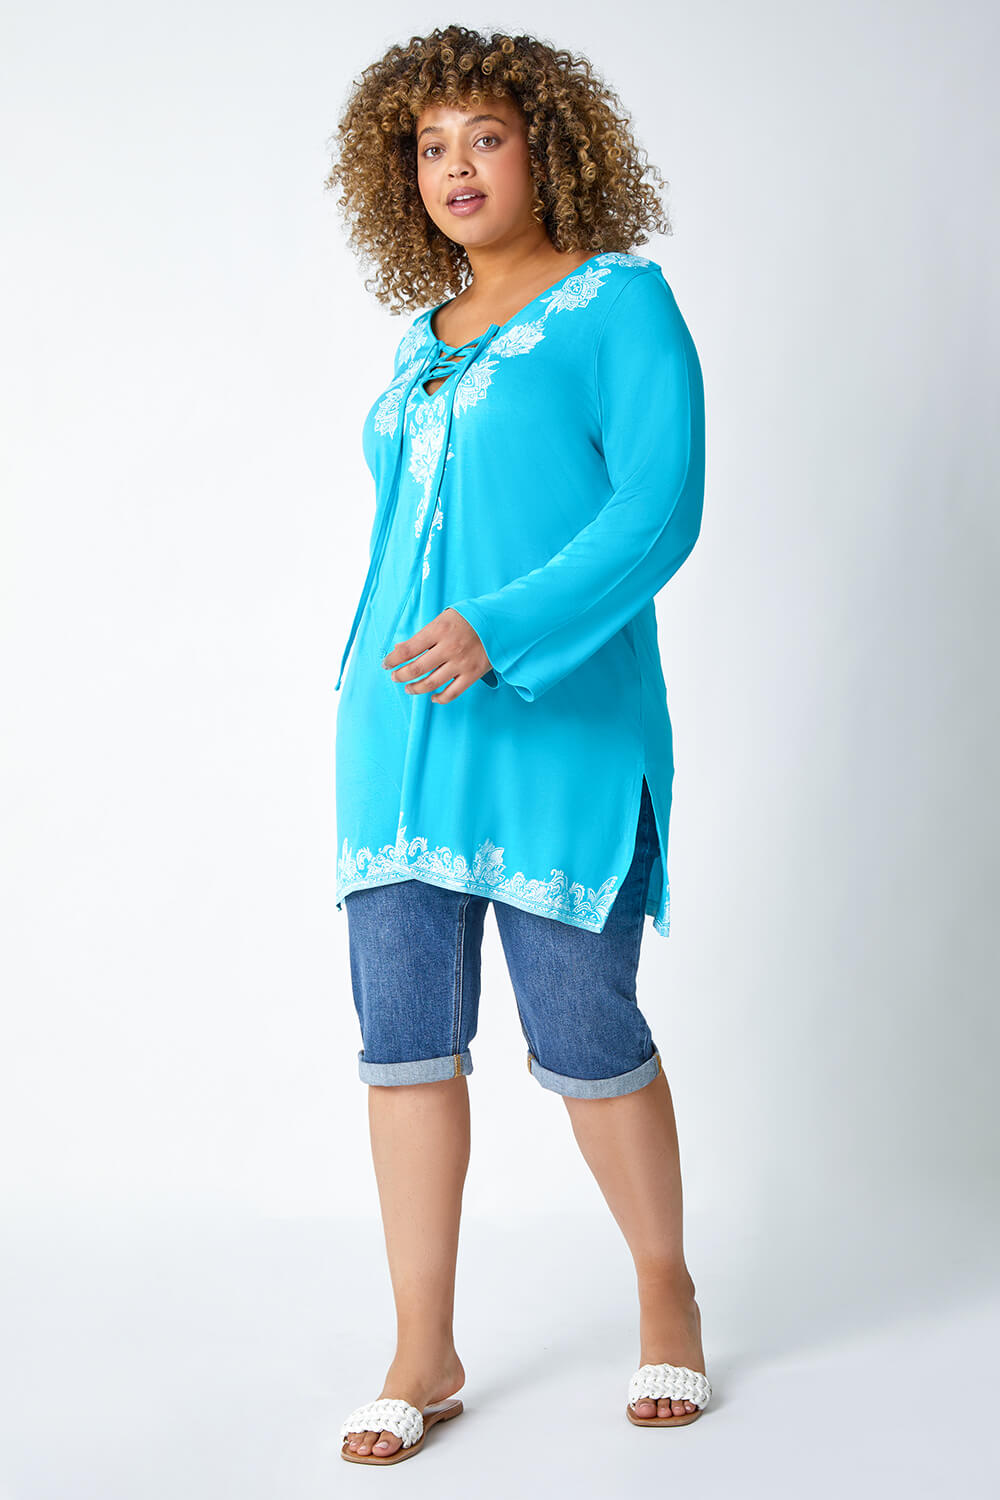 Turquoise Curve Border Print Lace Up Top, Image 2 of 5